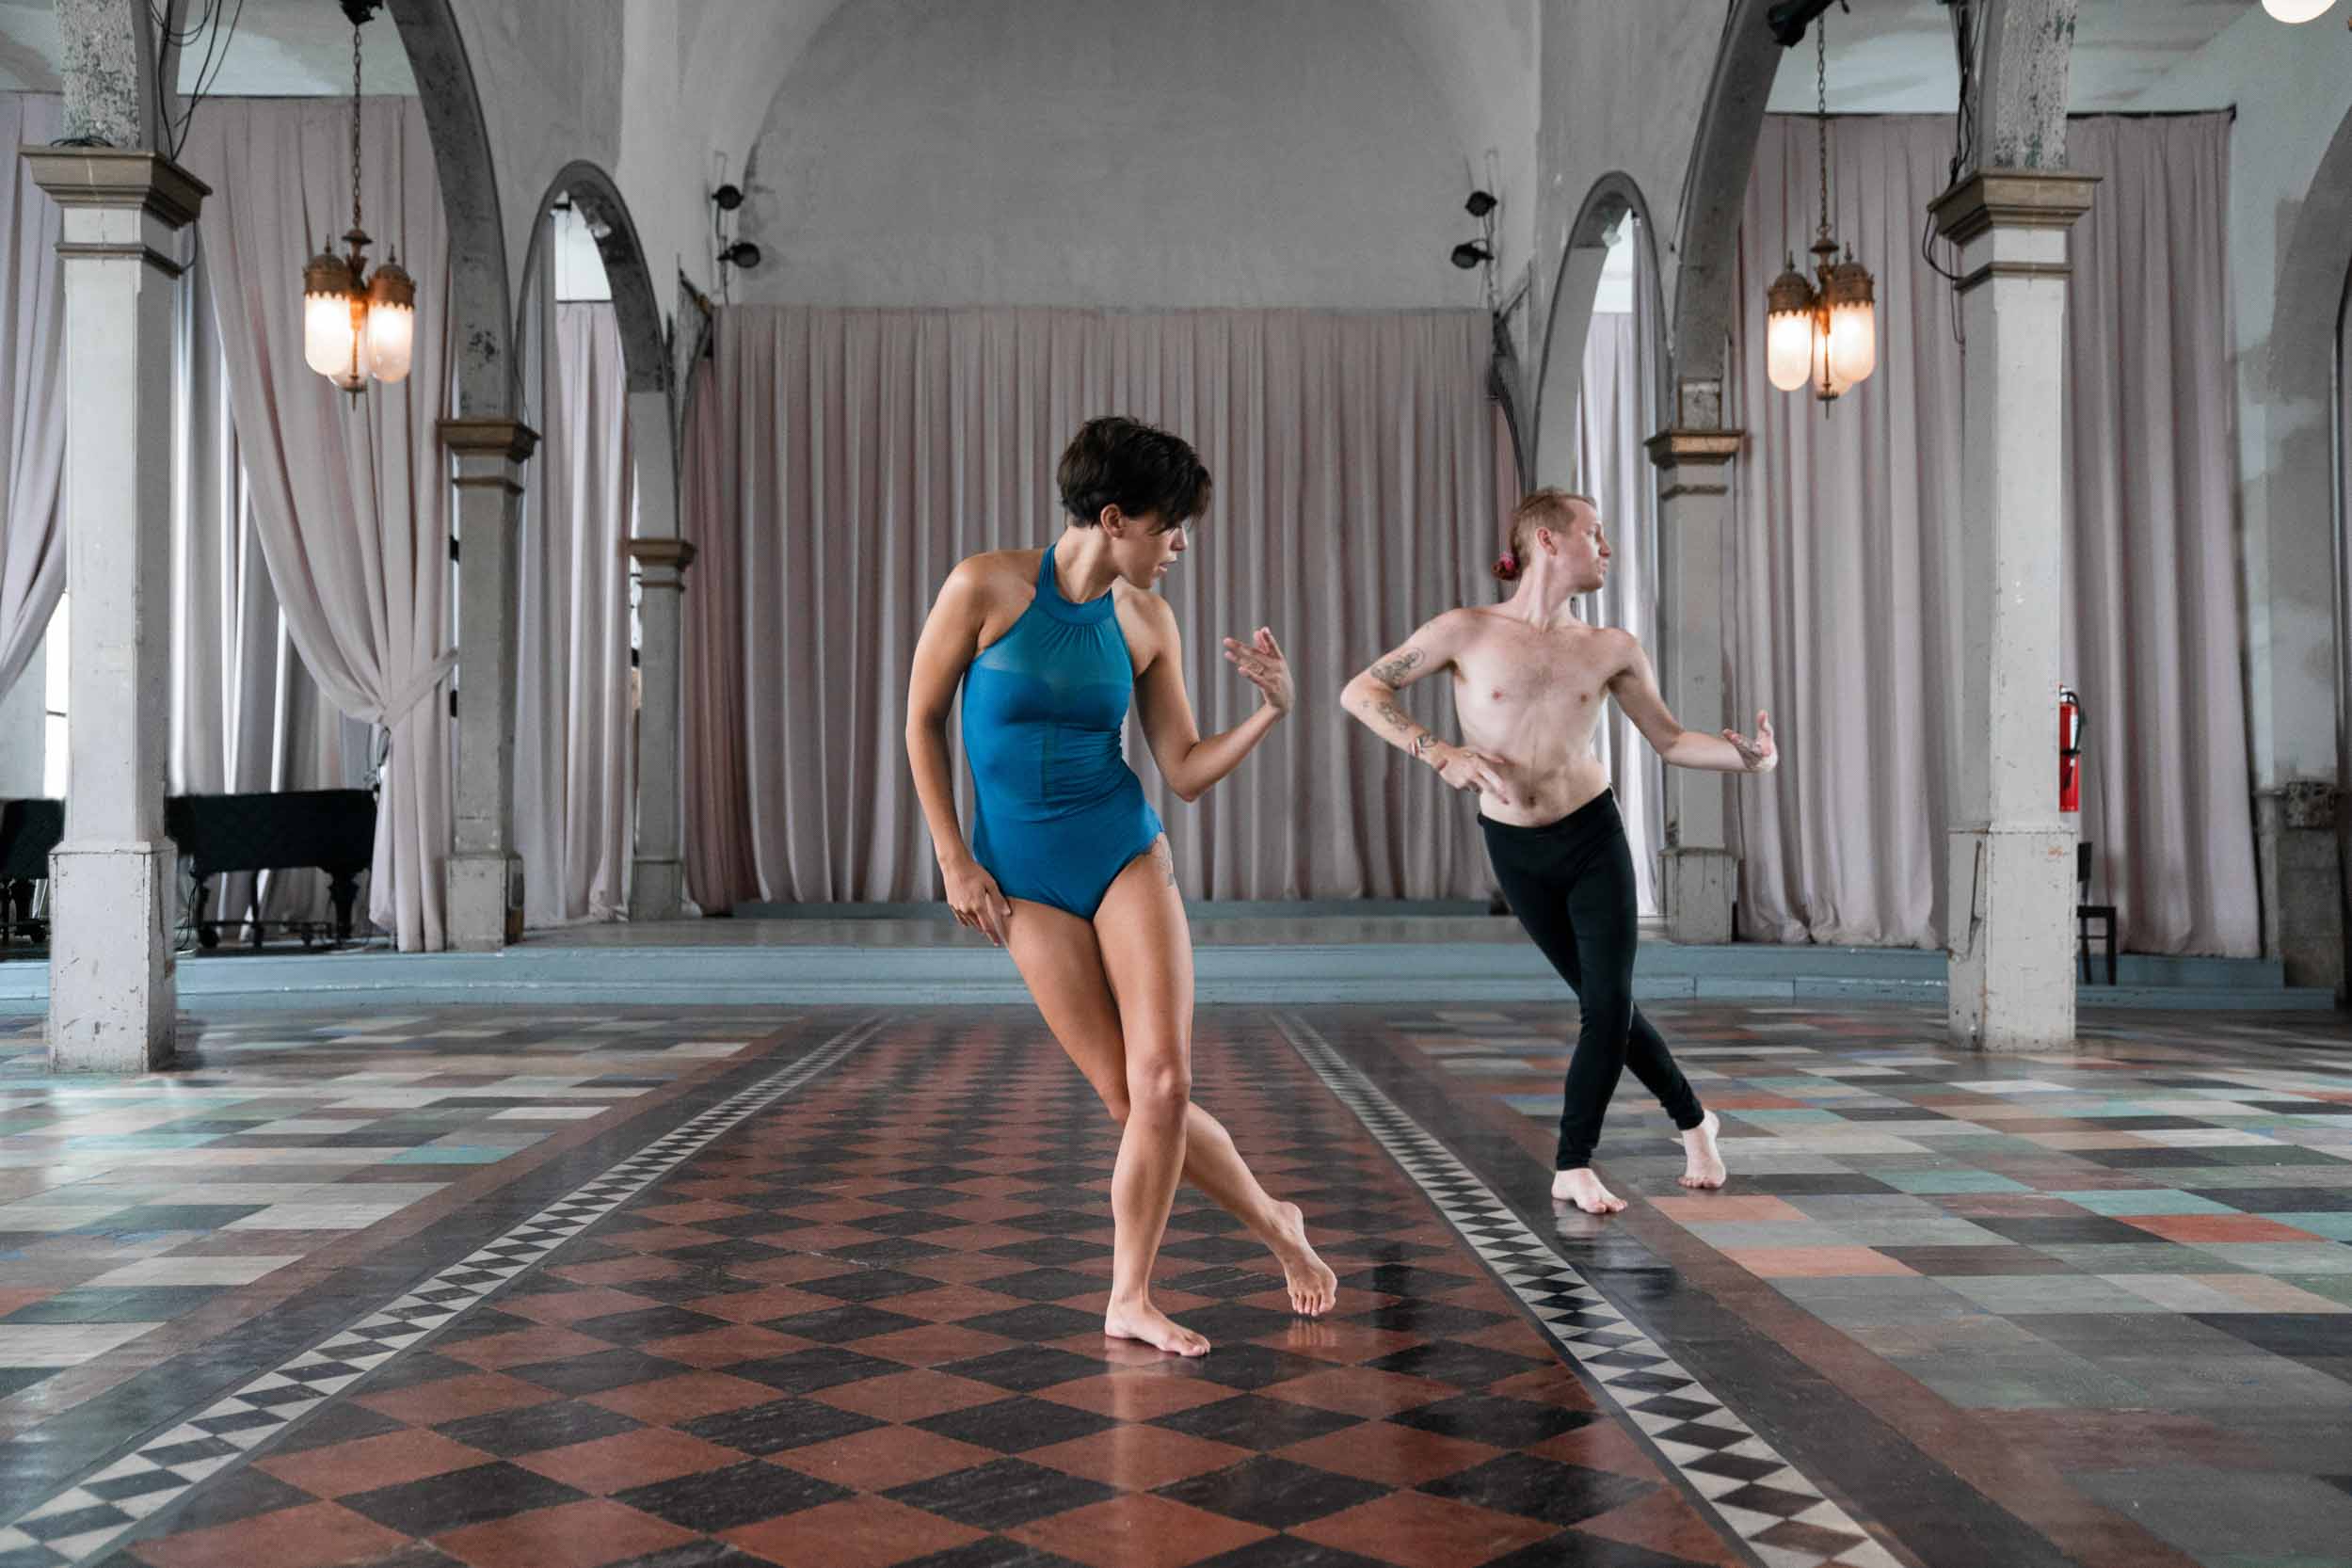 Ballet dancers performing in Marigny Opera House cathedral in New Orleans